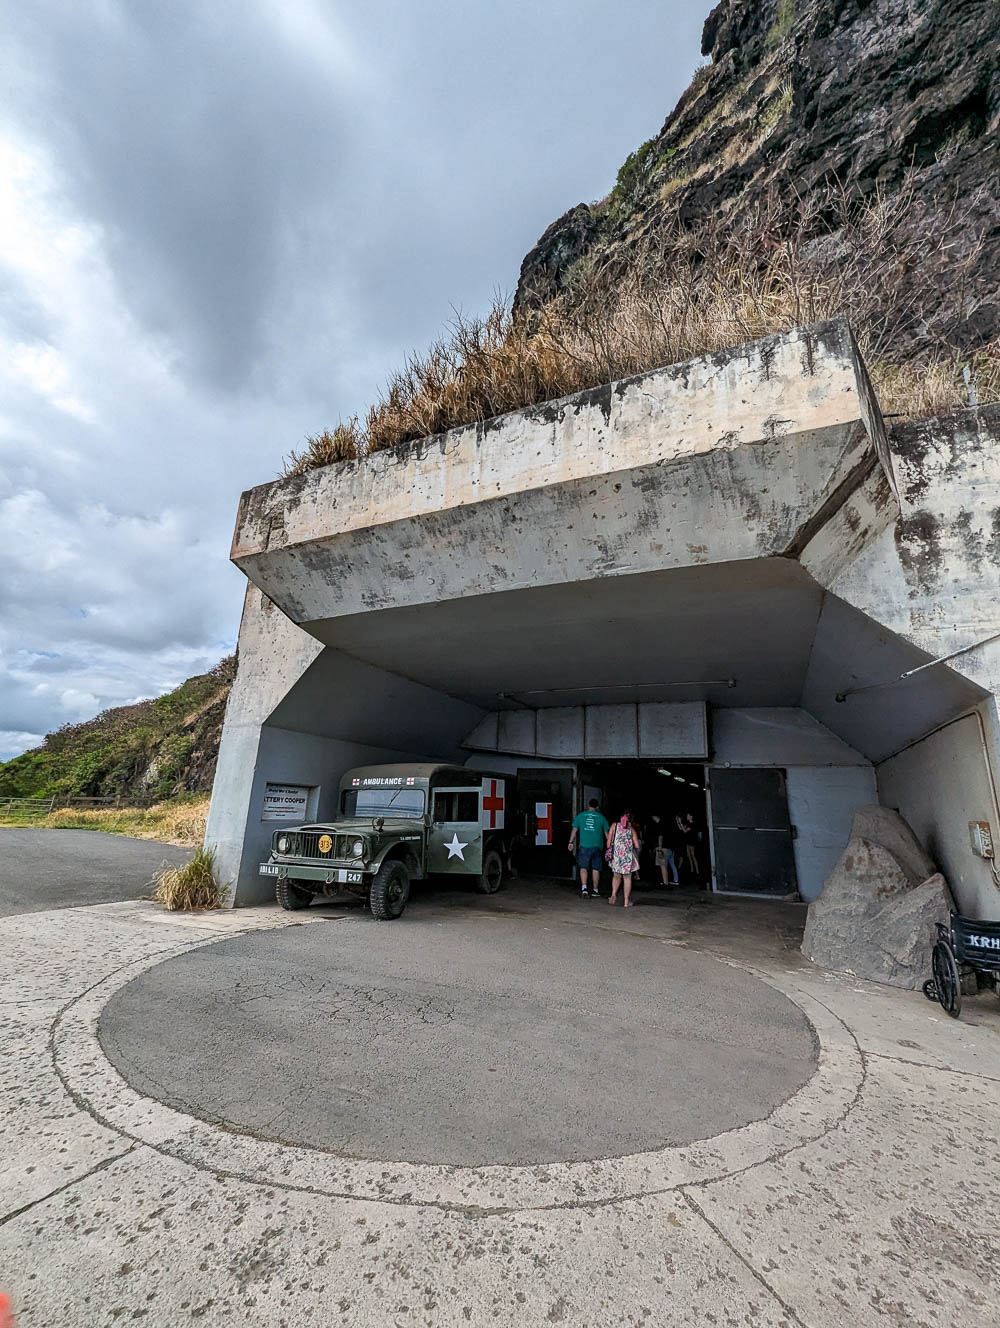 historical places to visit on oahu